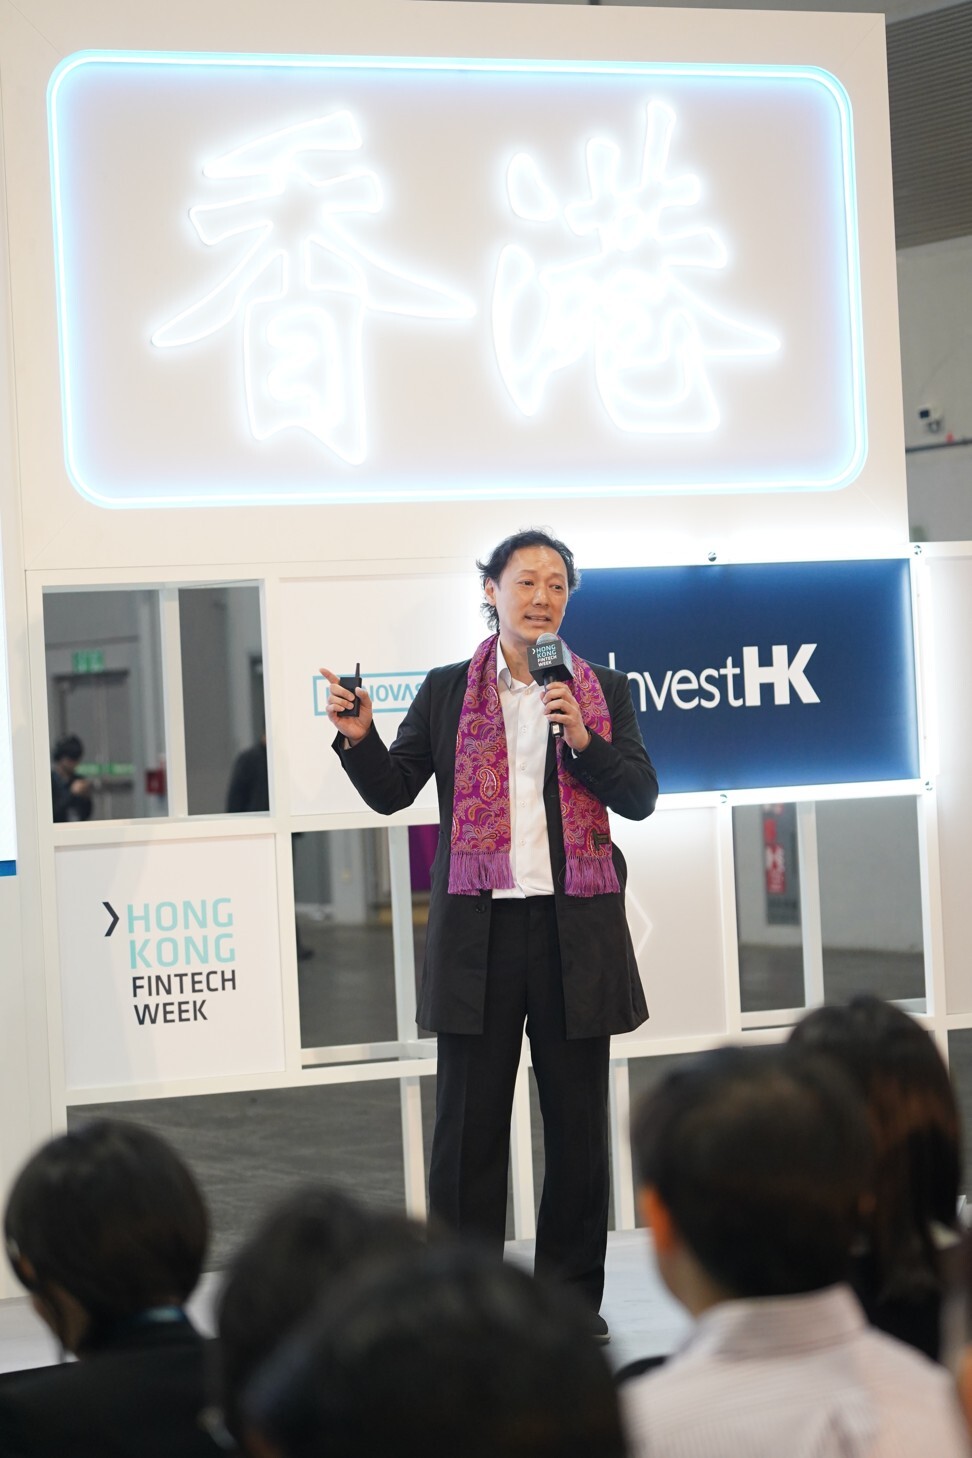 King Leung, head of fintech at InvestHK, says the breadth and depth of the city's financial services industry, coupled with a robust regulatory system, offers huge scale-up potential for the sector.